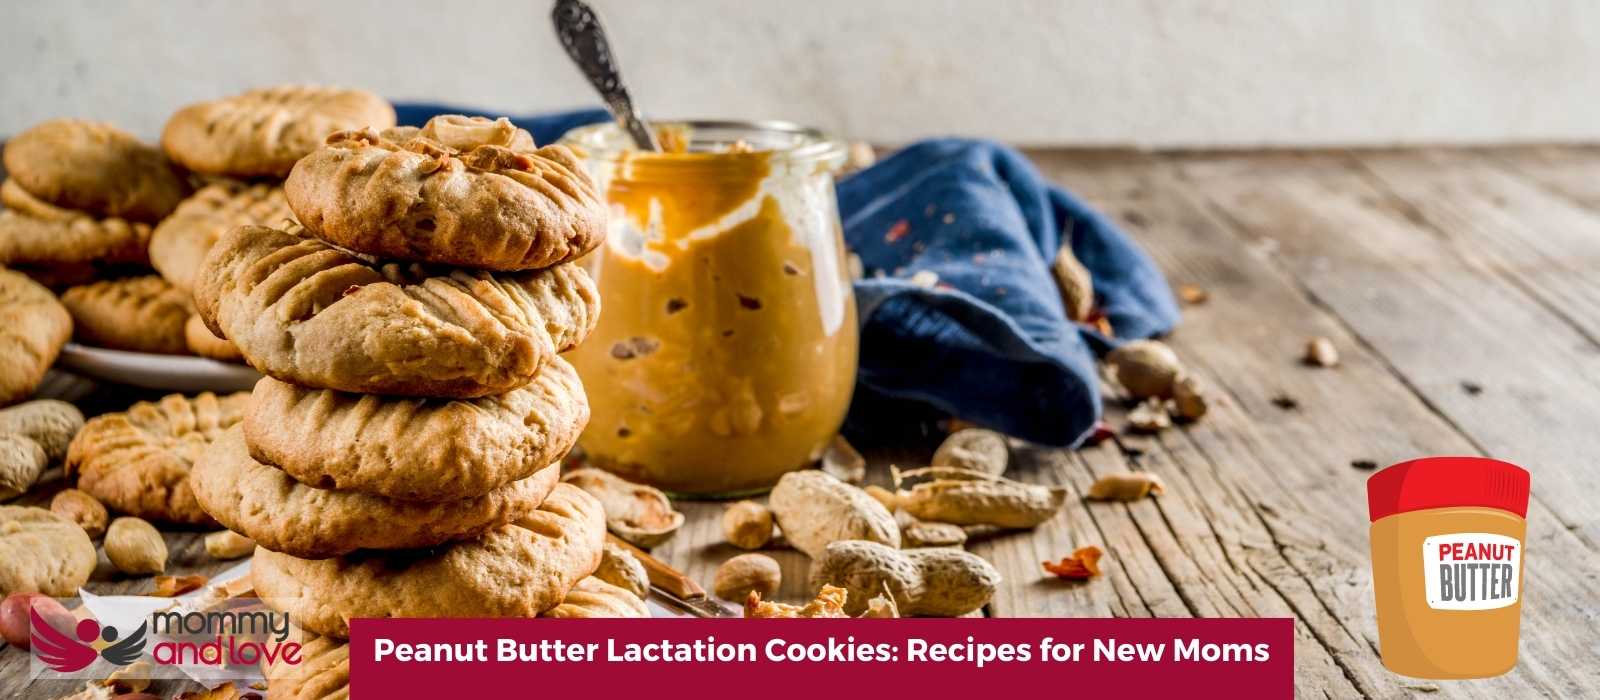 Peanut Butter Lactation Cookies Recipes for New Moms